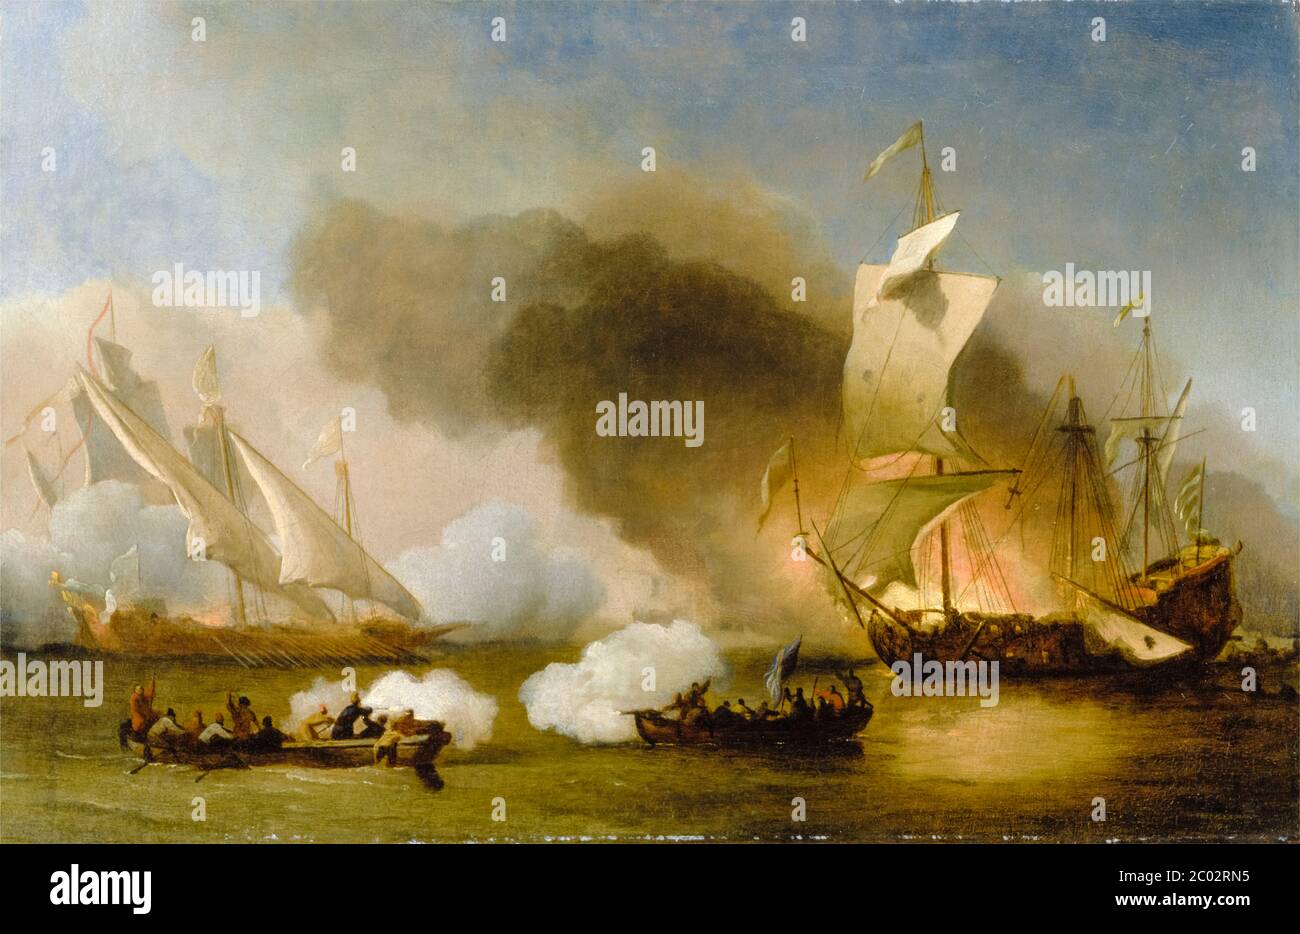 An Action between English Ships and Barbary Corsairs (Barbary Pirates), painting by Willem van de Velde the Younger, circa 1695 Stock Photo